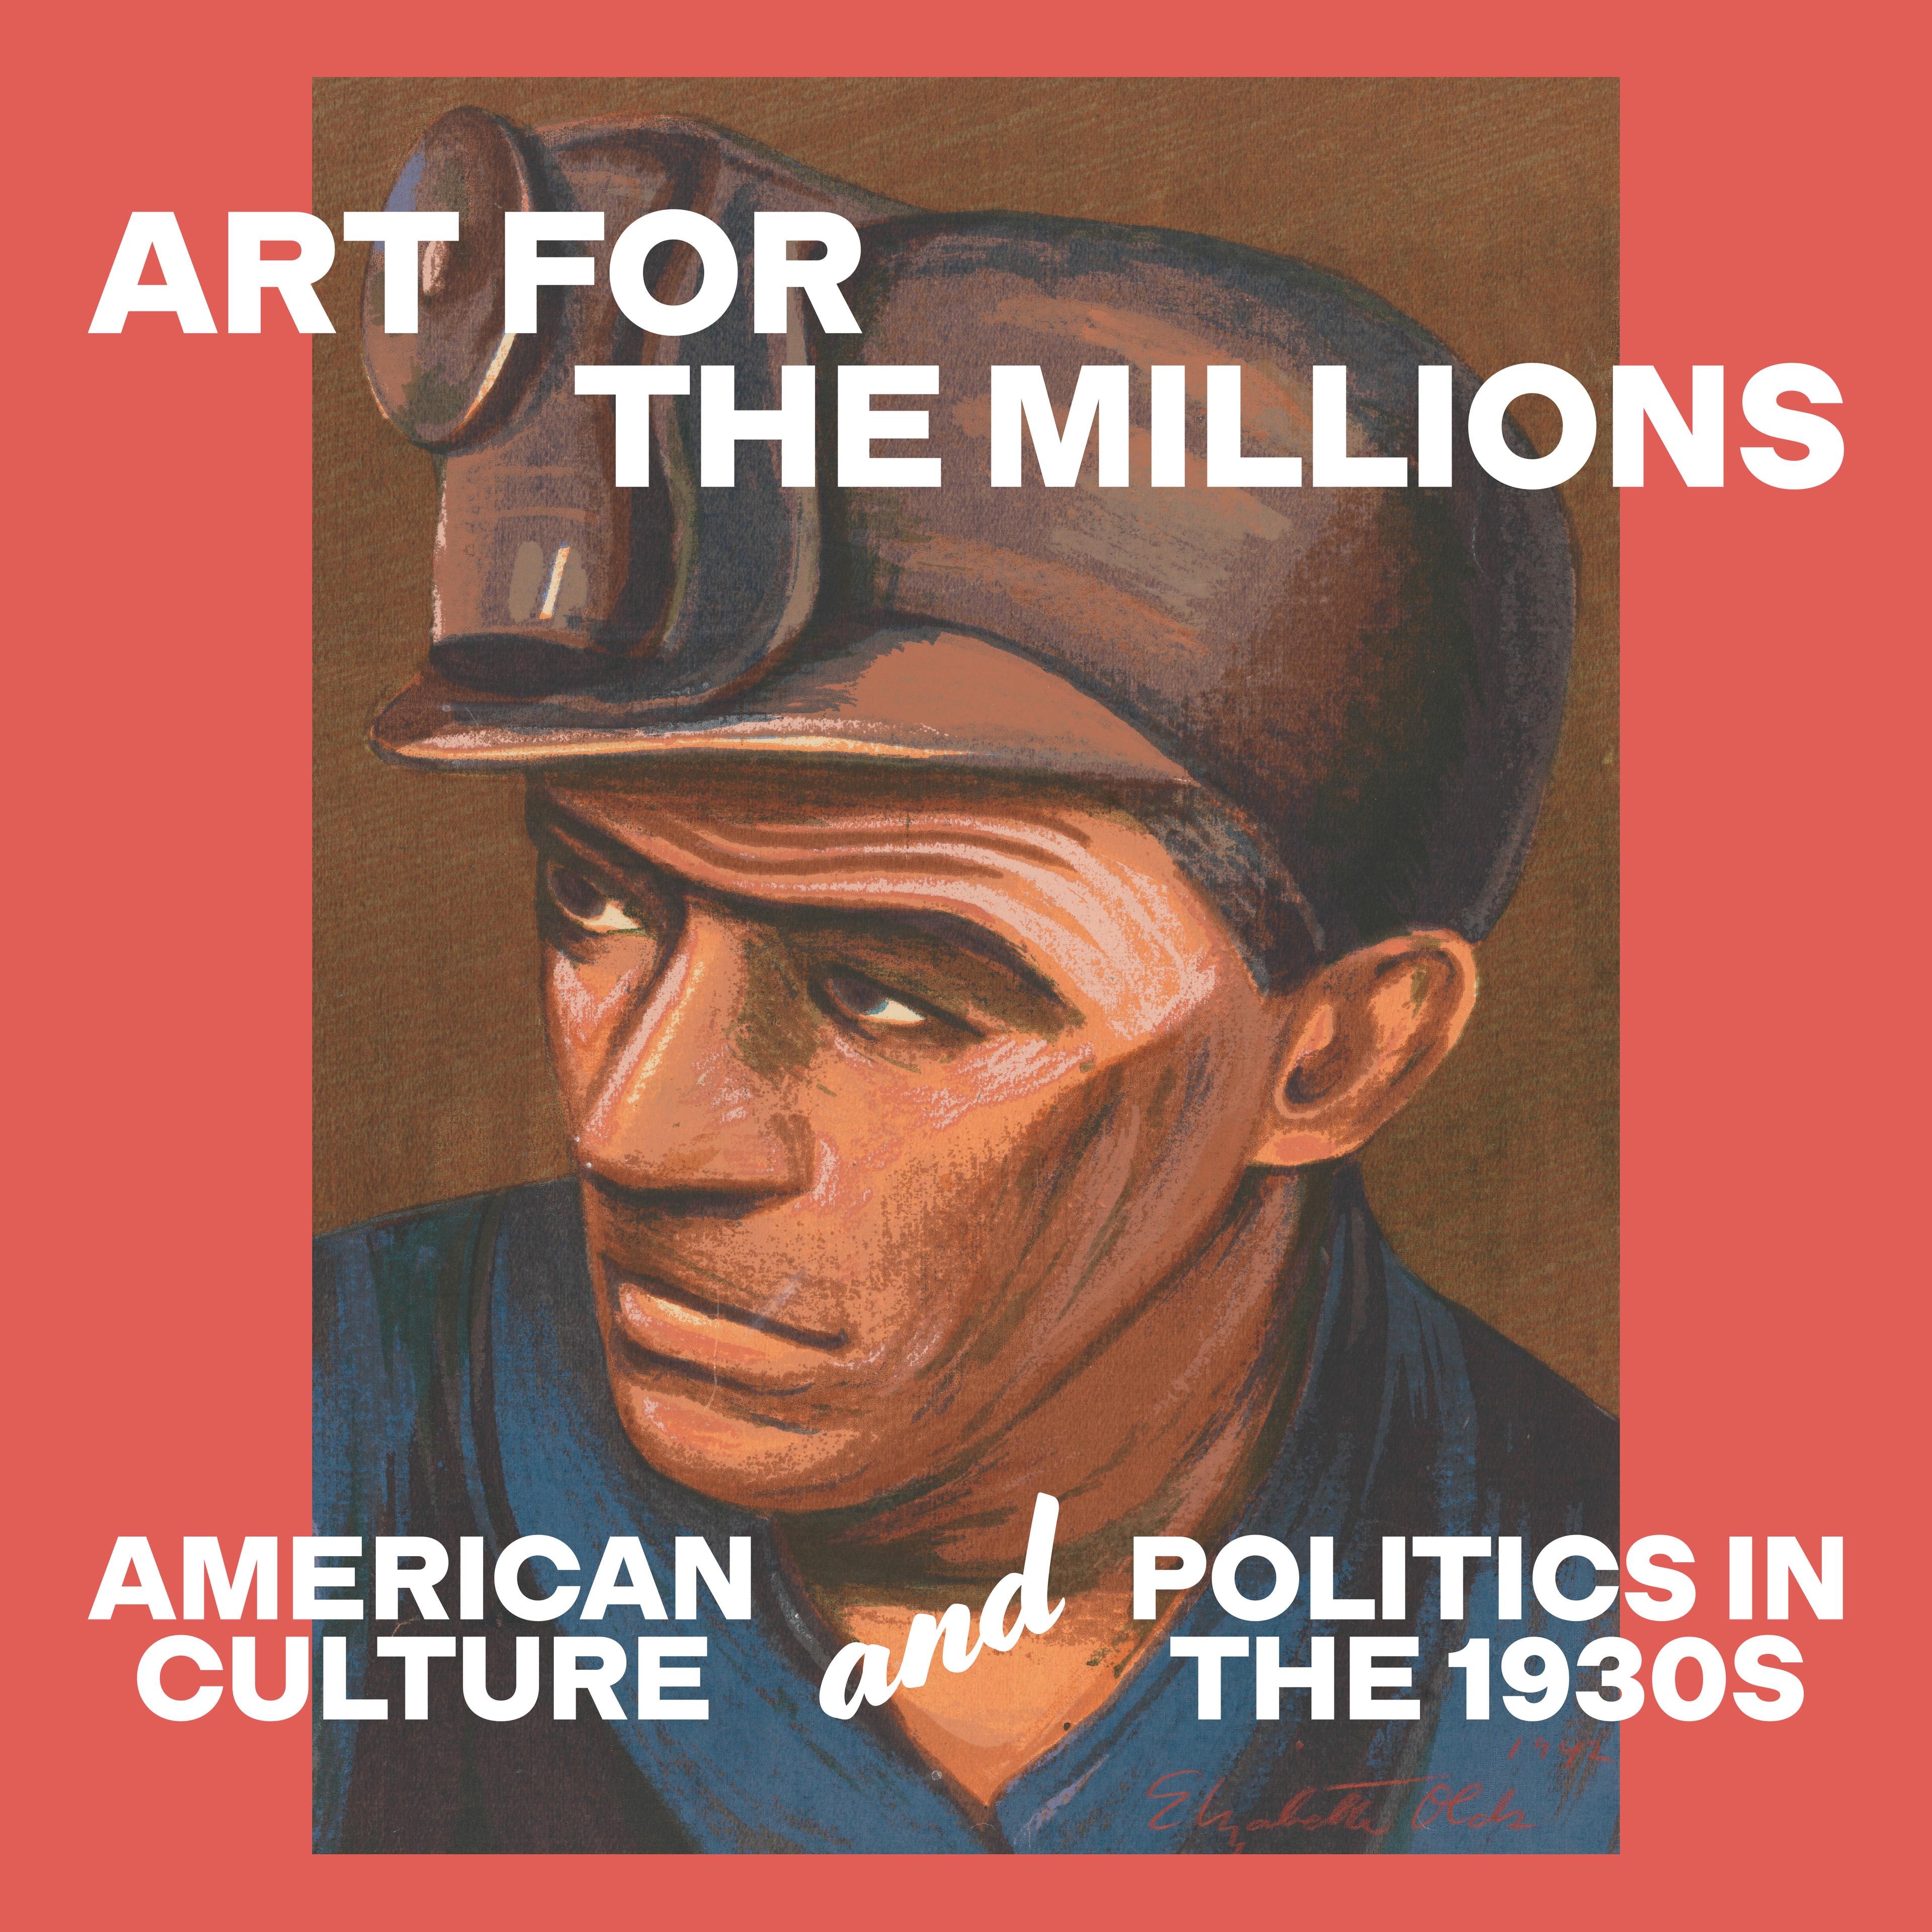 Portrait of a man with a brown cap and text that reads "Art for The Millions"